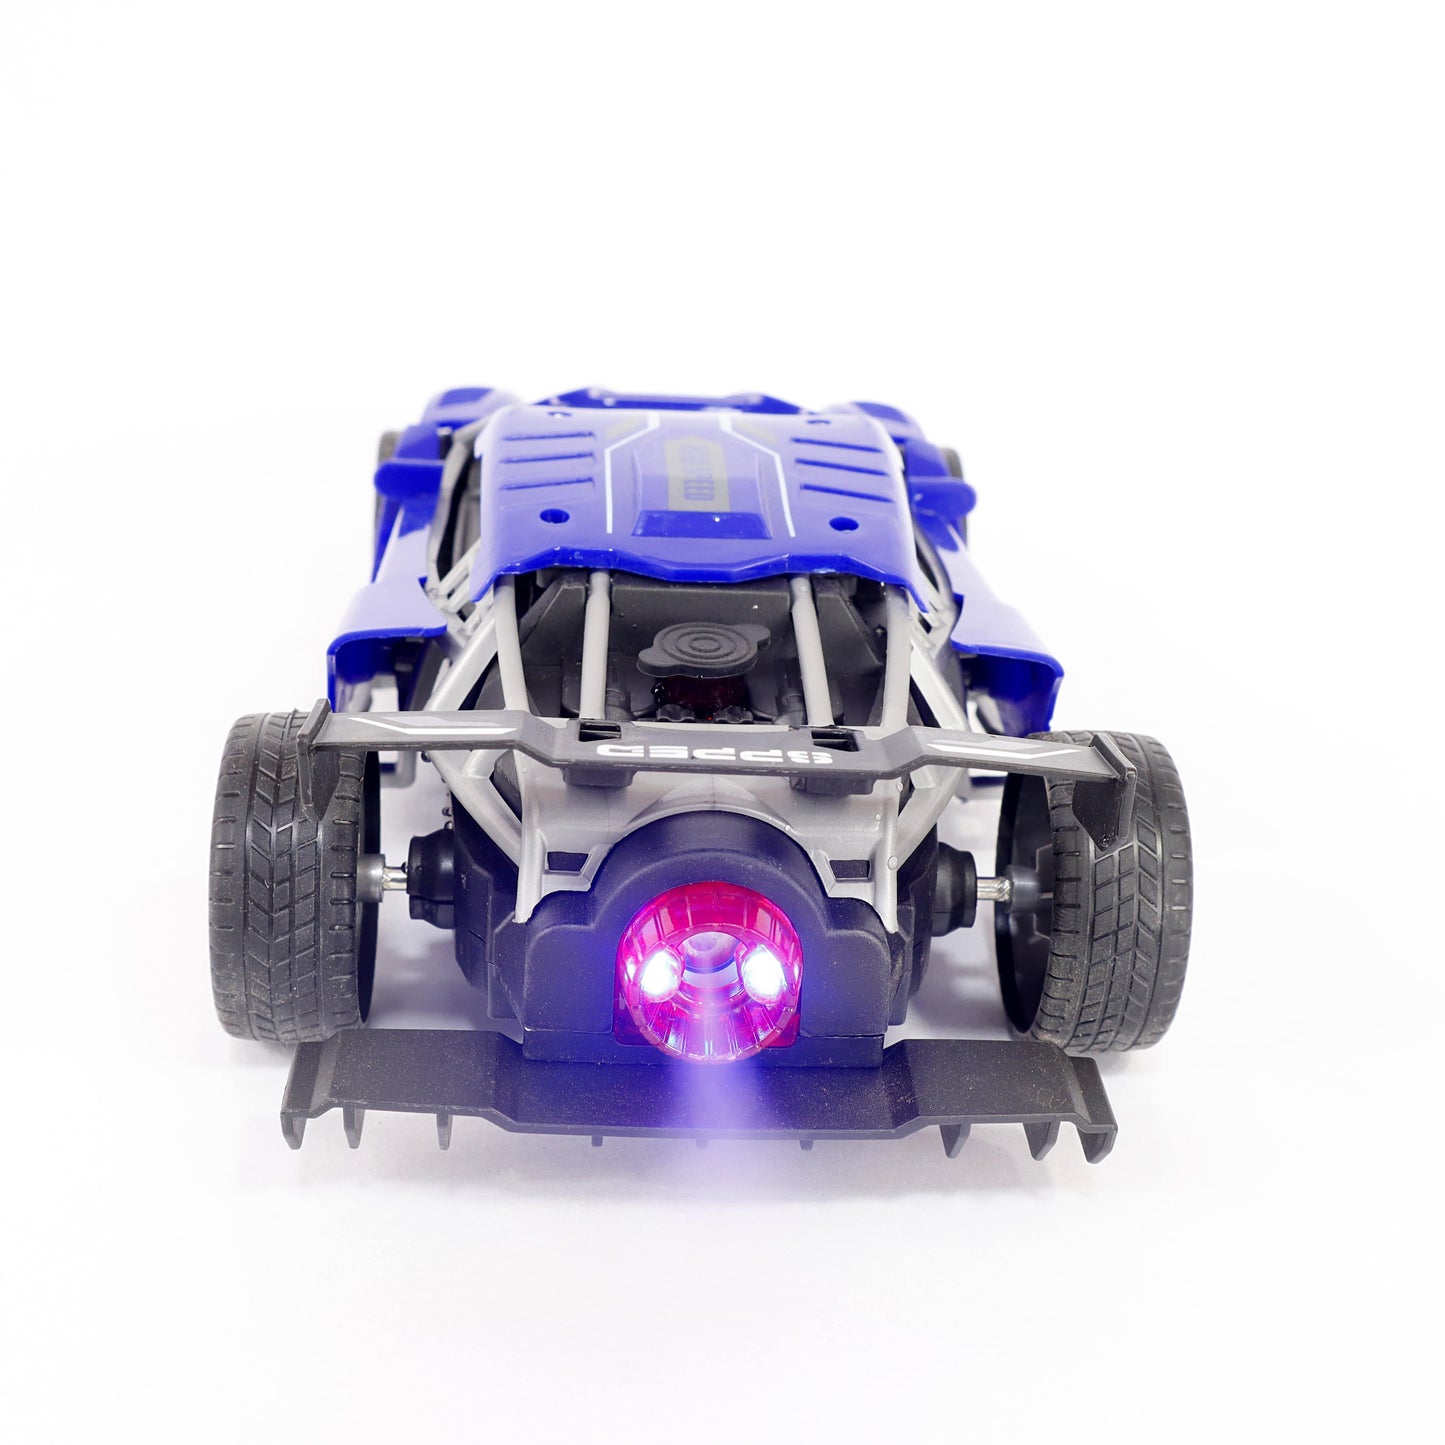 Turbo Smoke-Enabled Sports Racing Car: Safe, Fast, and Full of Thrills! Blue Colour